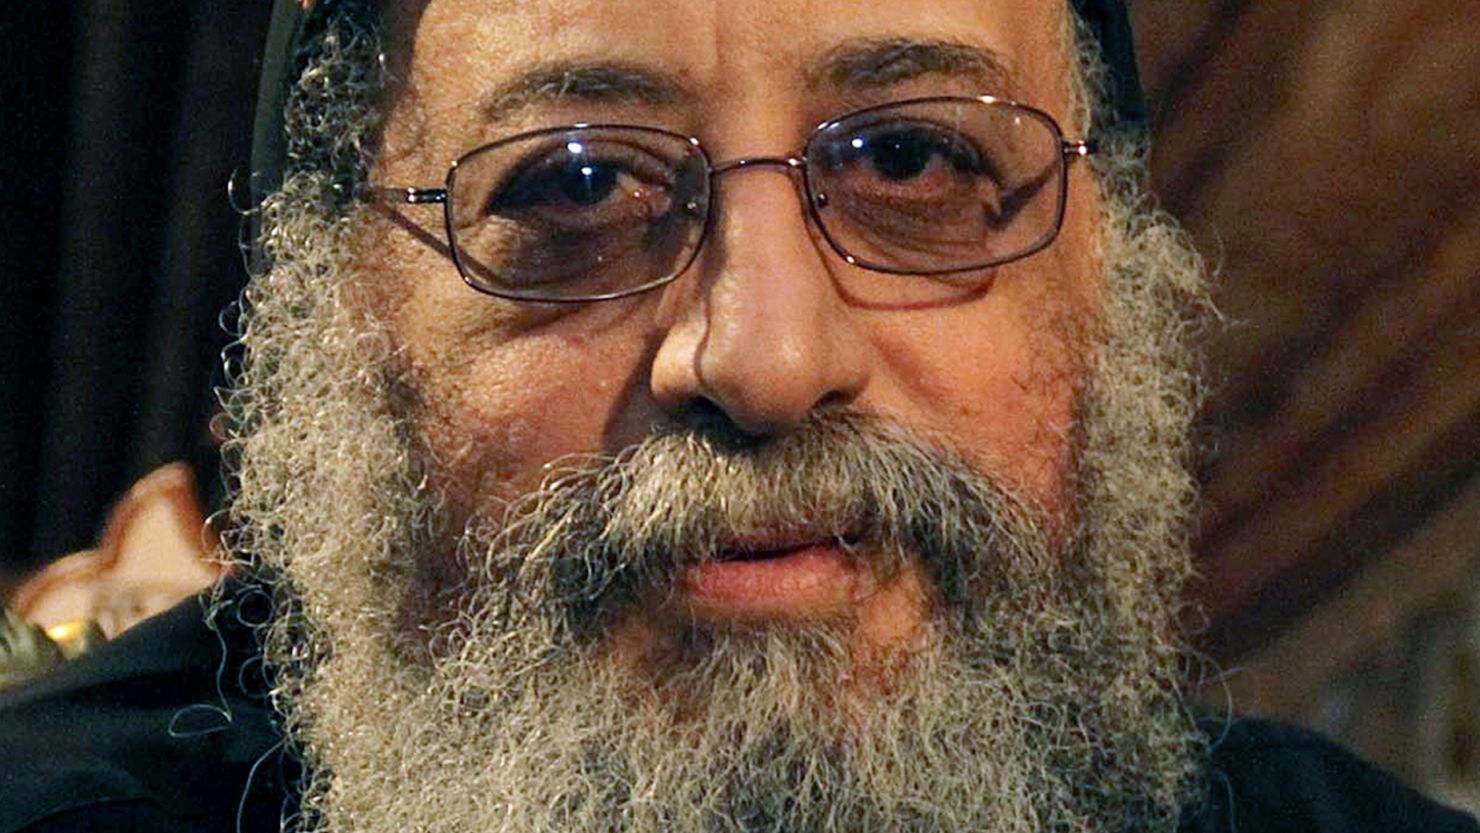 Bishop Tawadros, 60, was named the new Coptic Christian pope in a ceremony in Cairo on November 4, 2012.